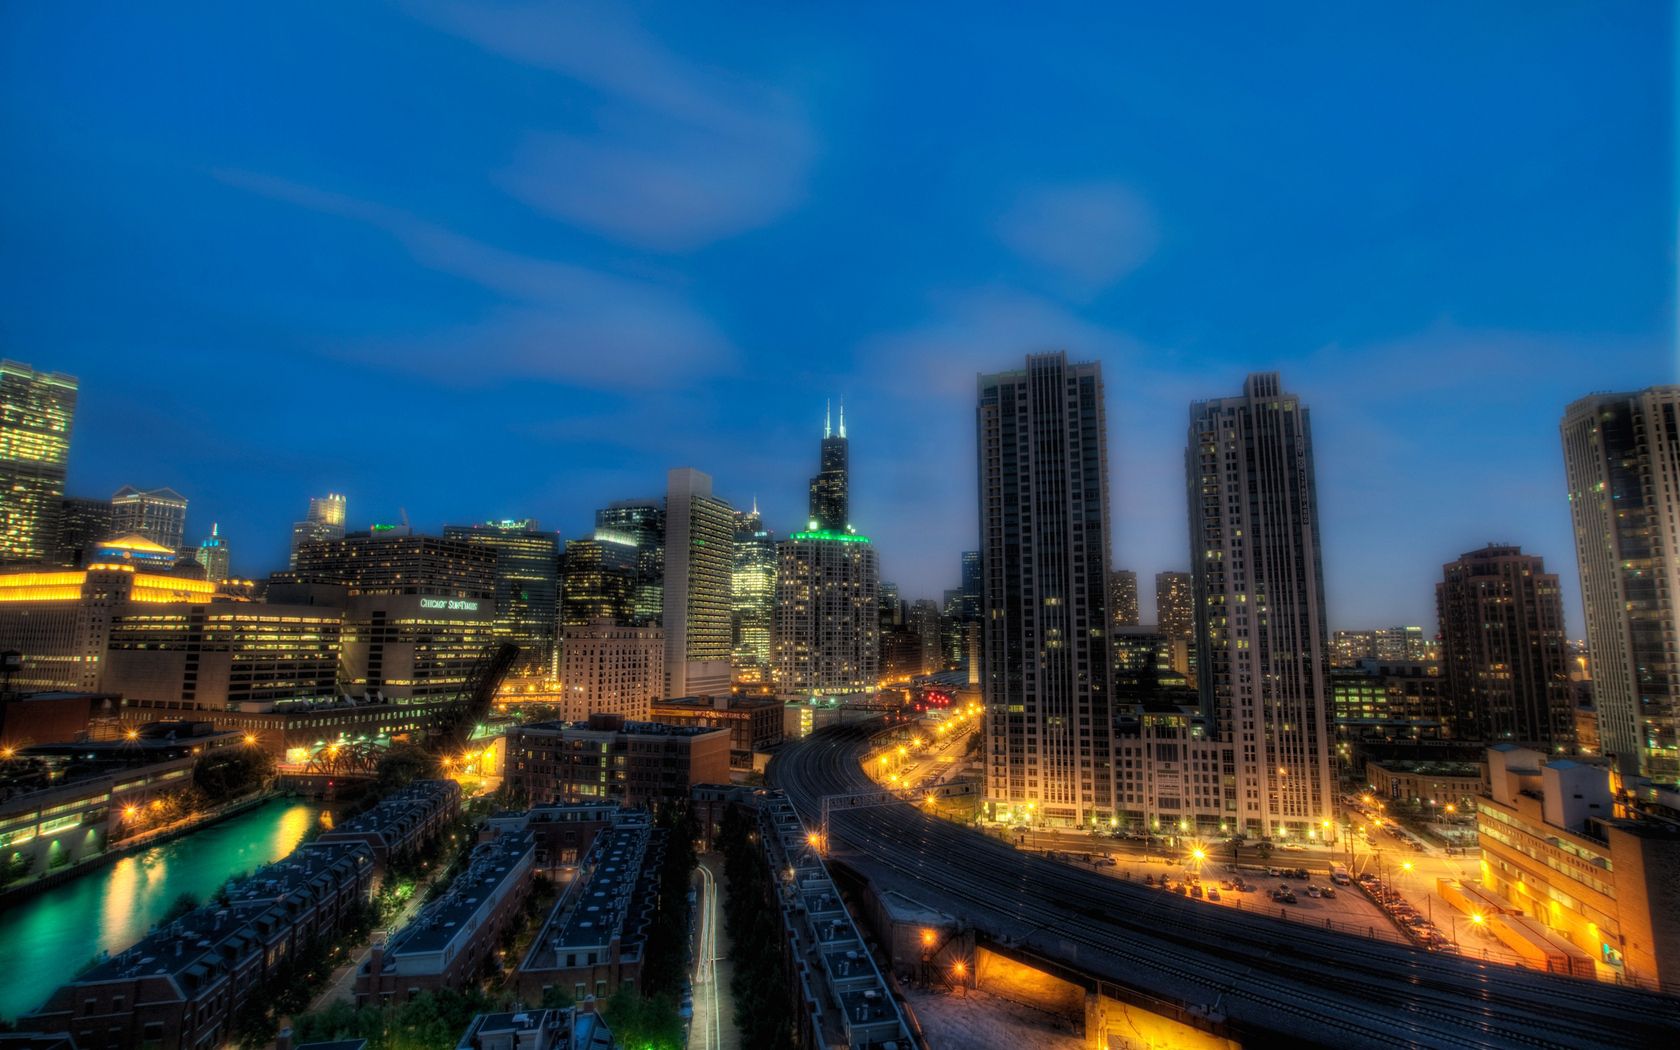 cities, night, city lights, skyscrapers, hdr, chicago, illinois Image for desktop